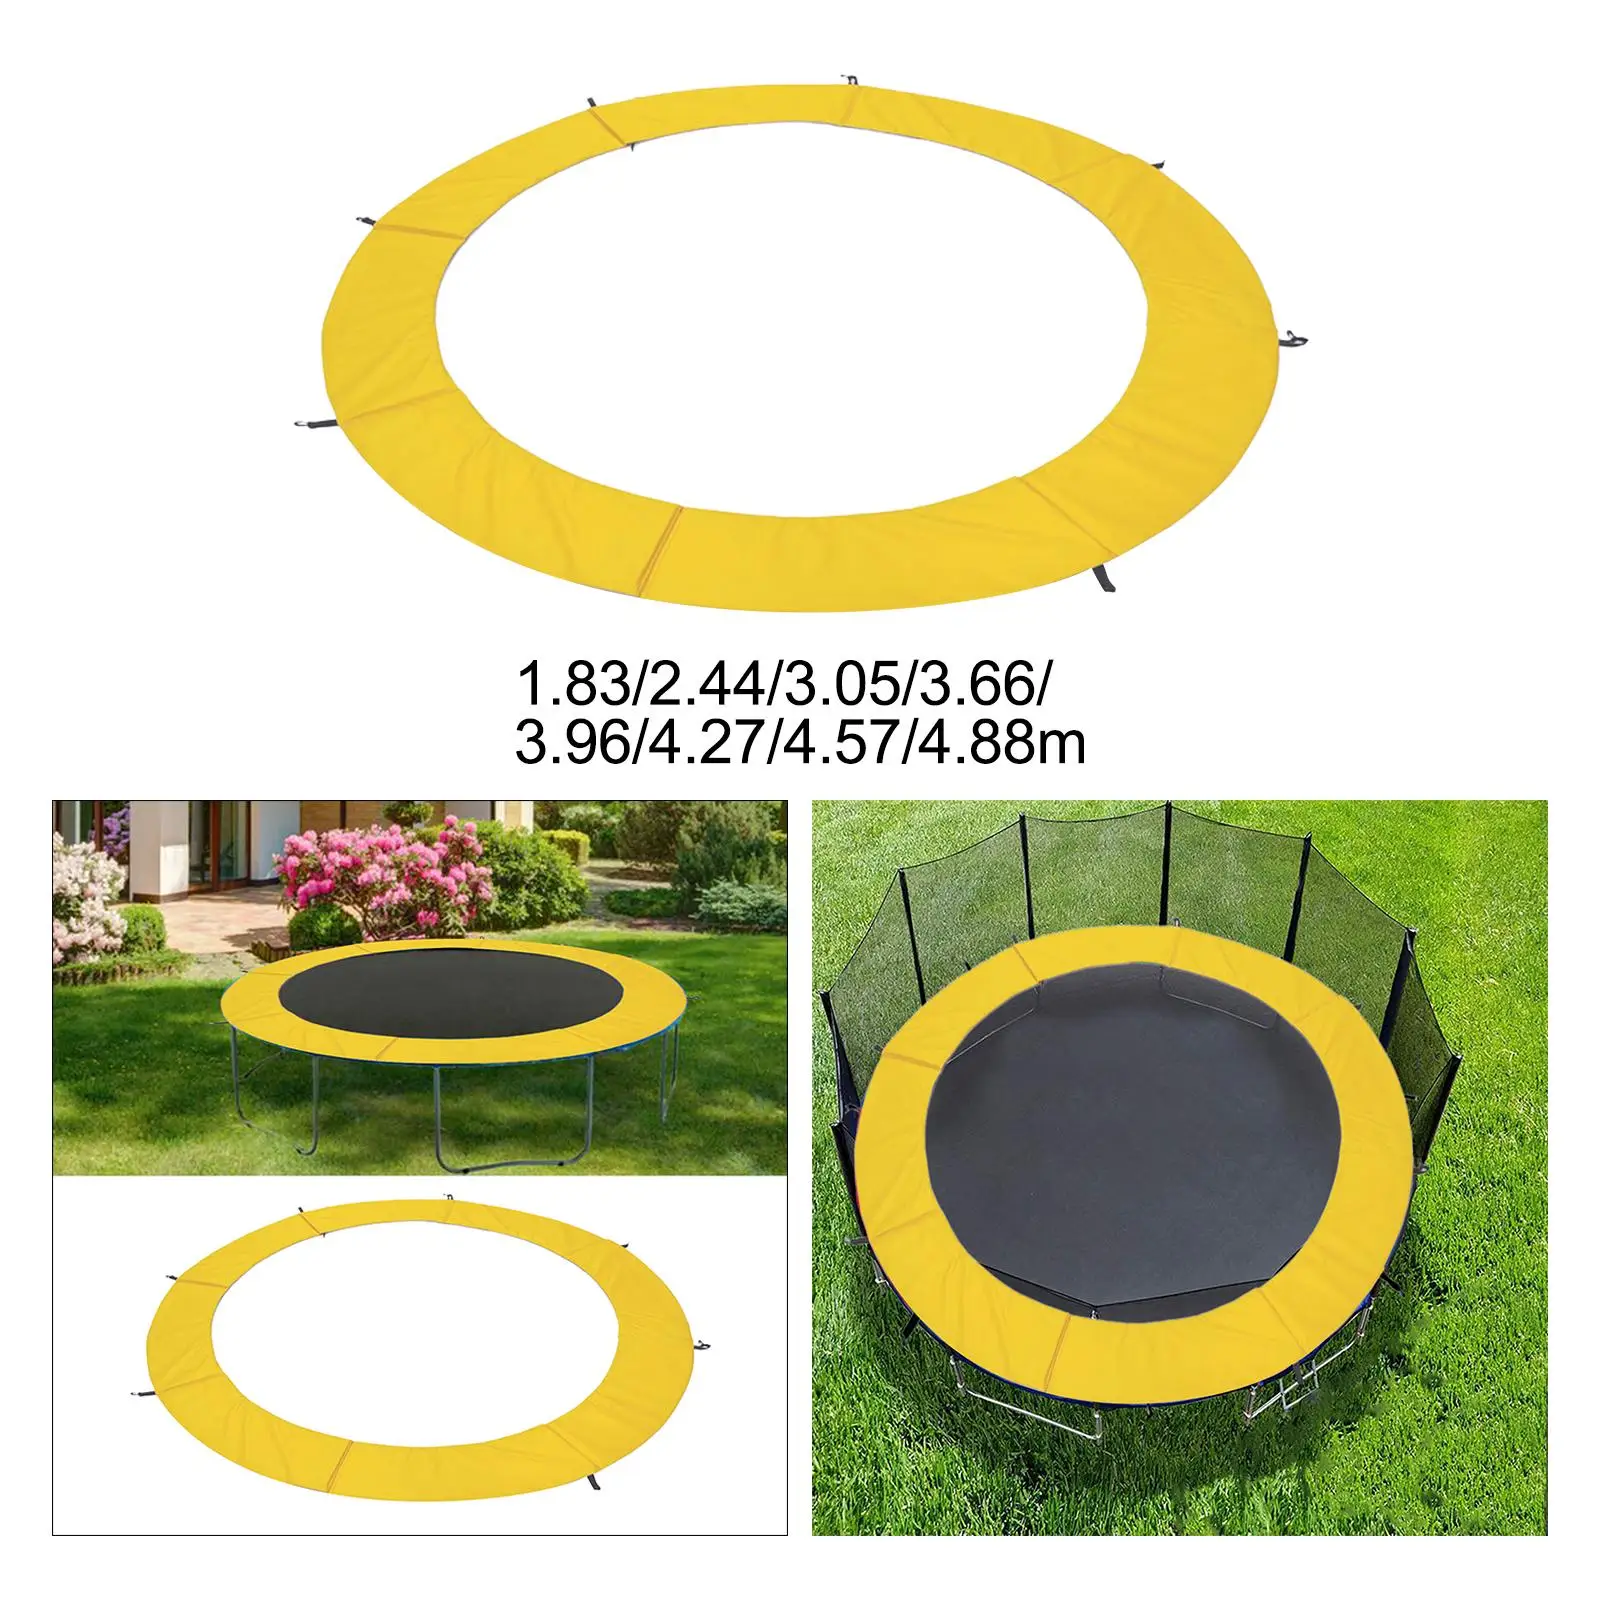 Trampoline Pad Cover Replacement Safety Padding Tear Resistant Waterproof Jumping Bed Cover Surround Guard Easy to Install